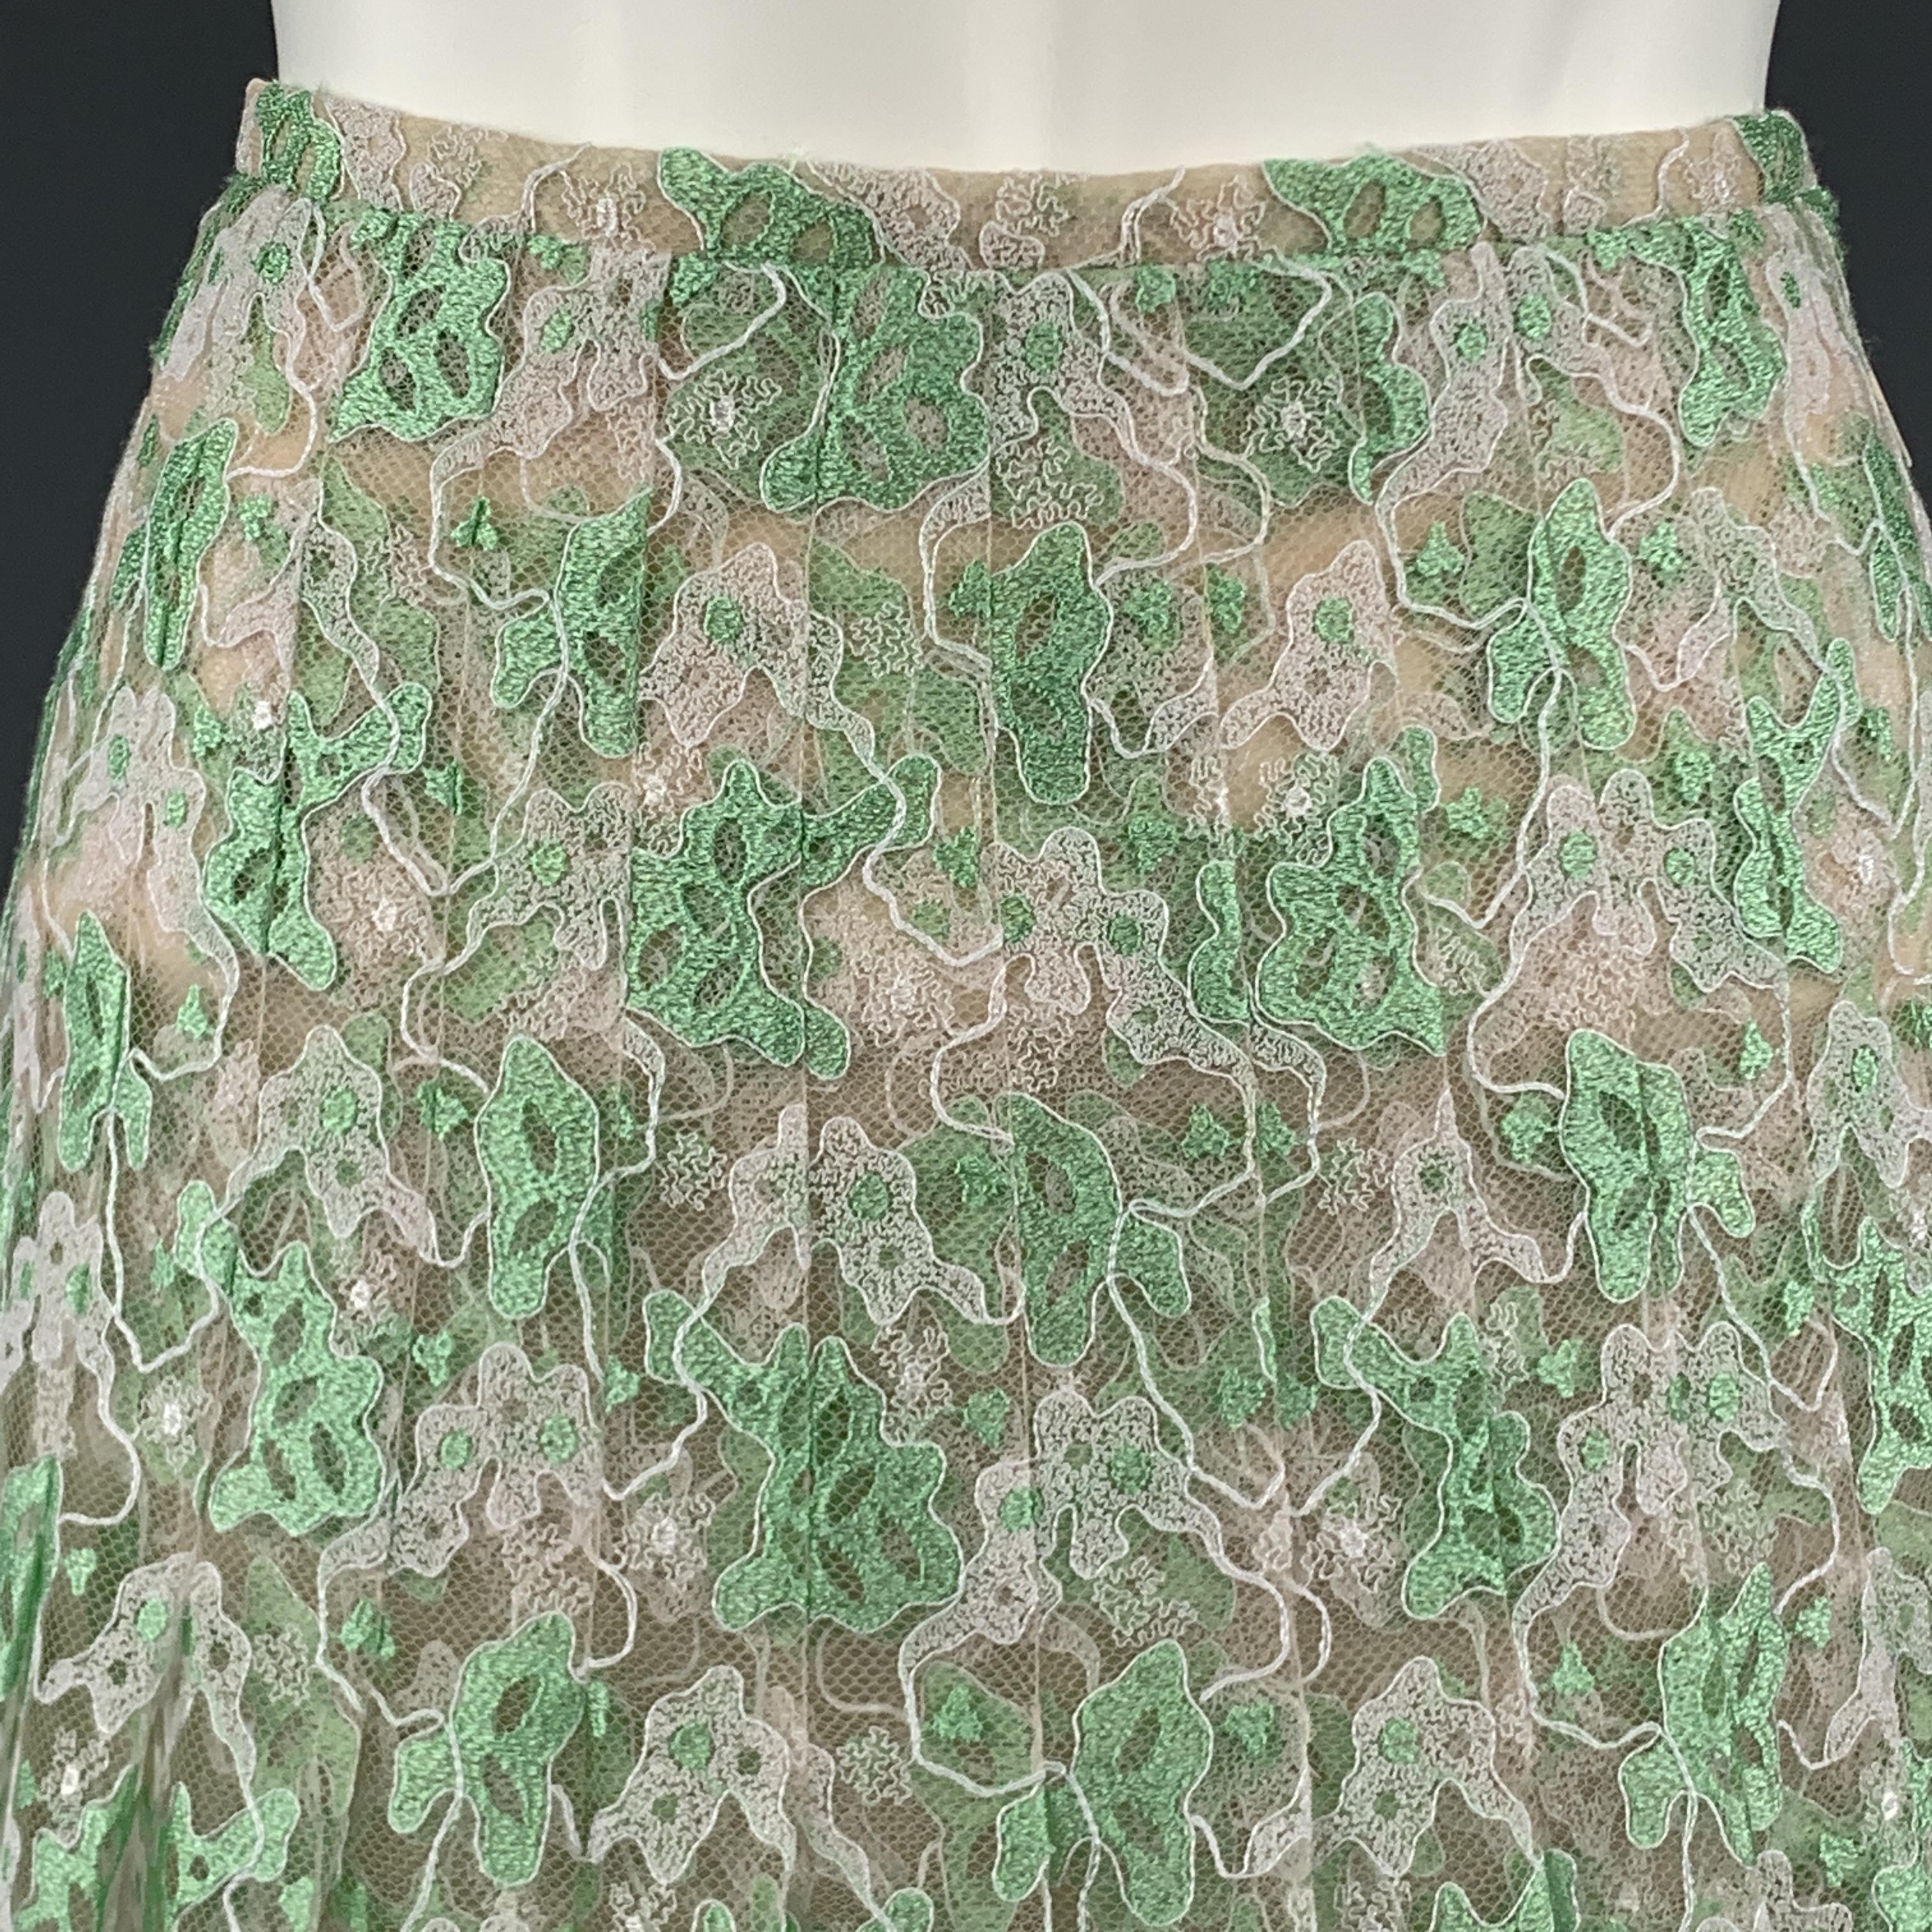 CHRISTOPHER KANE skirt comes in green and white lace with box pleats and silk liner. Made in France.

Excellent Pre-Owned Condition.
Marked: 6

Measurements:

Waist: 26 in.
Hip: 38 in.
Length: 18 in.